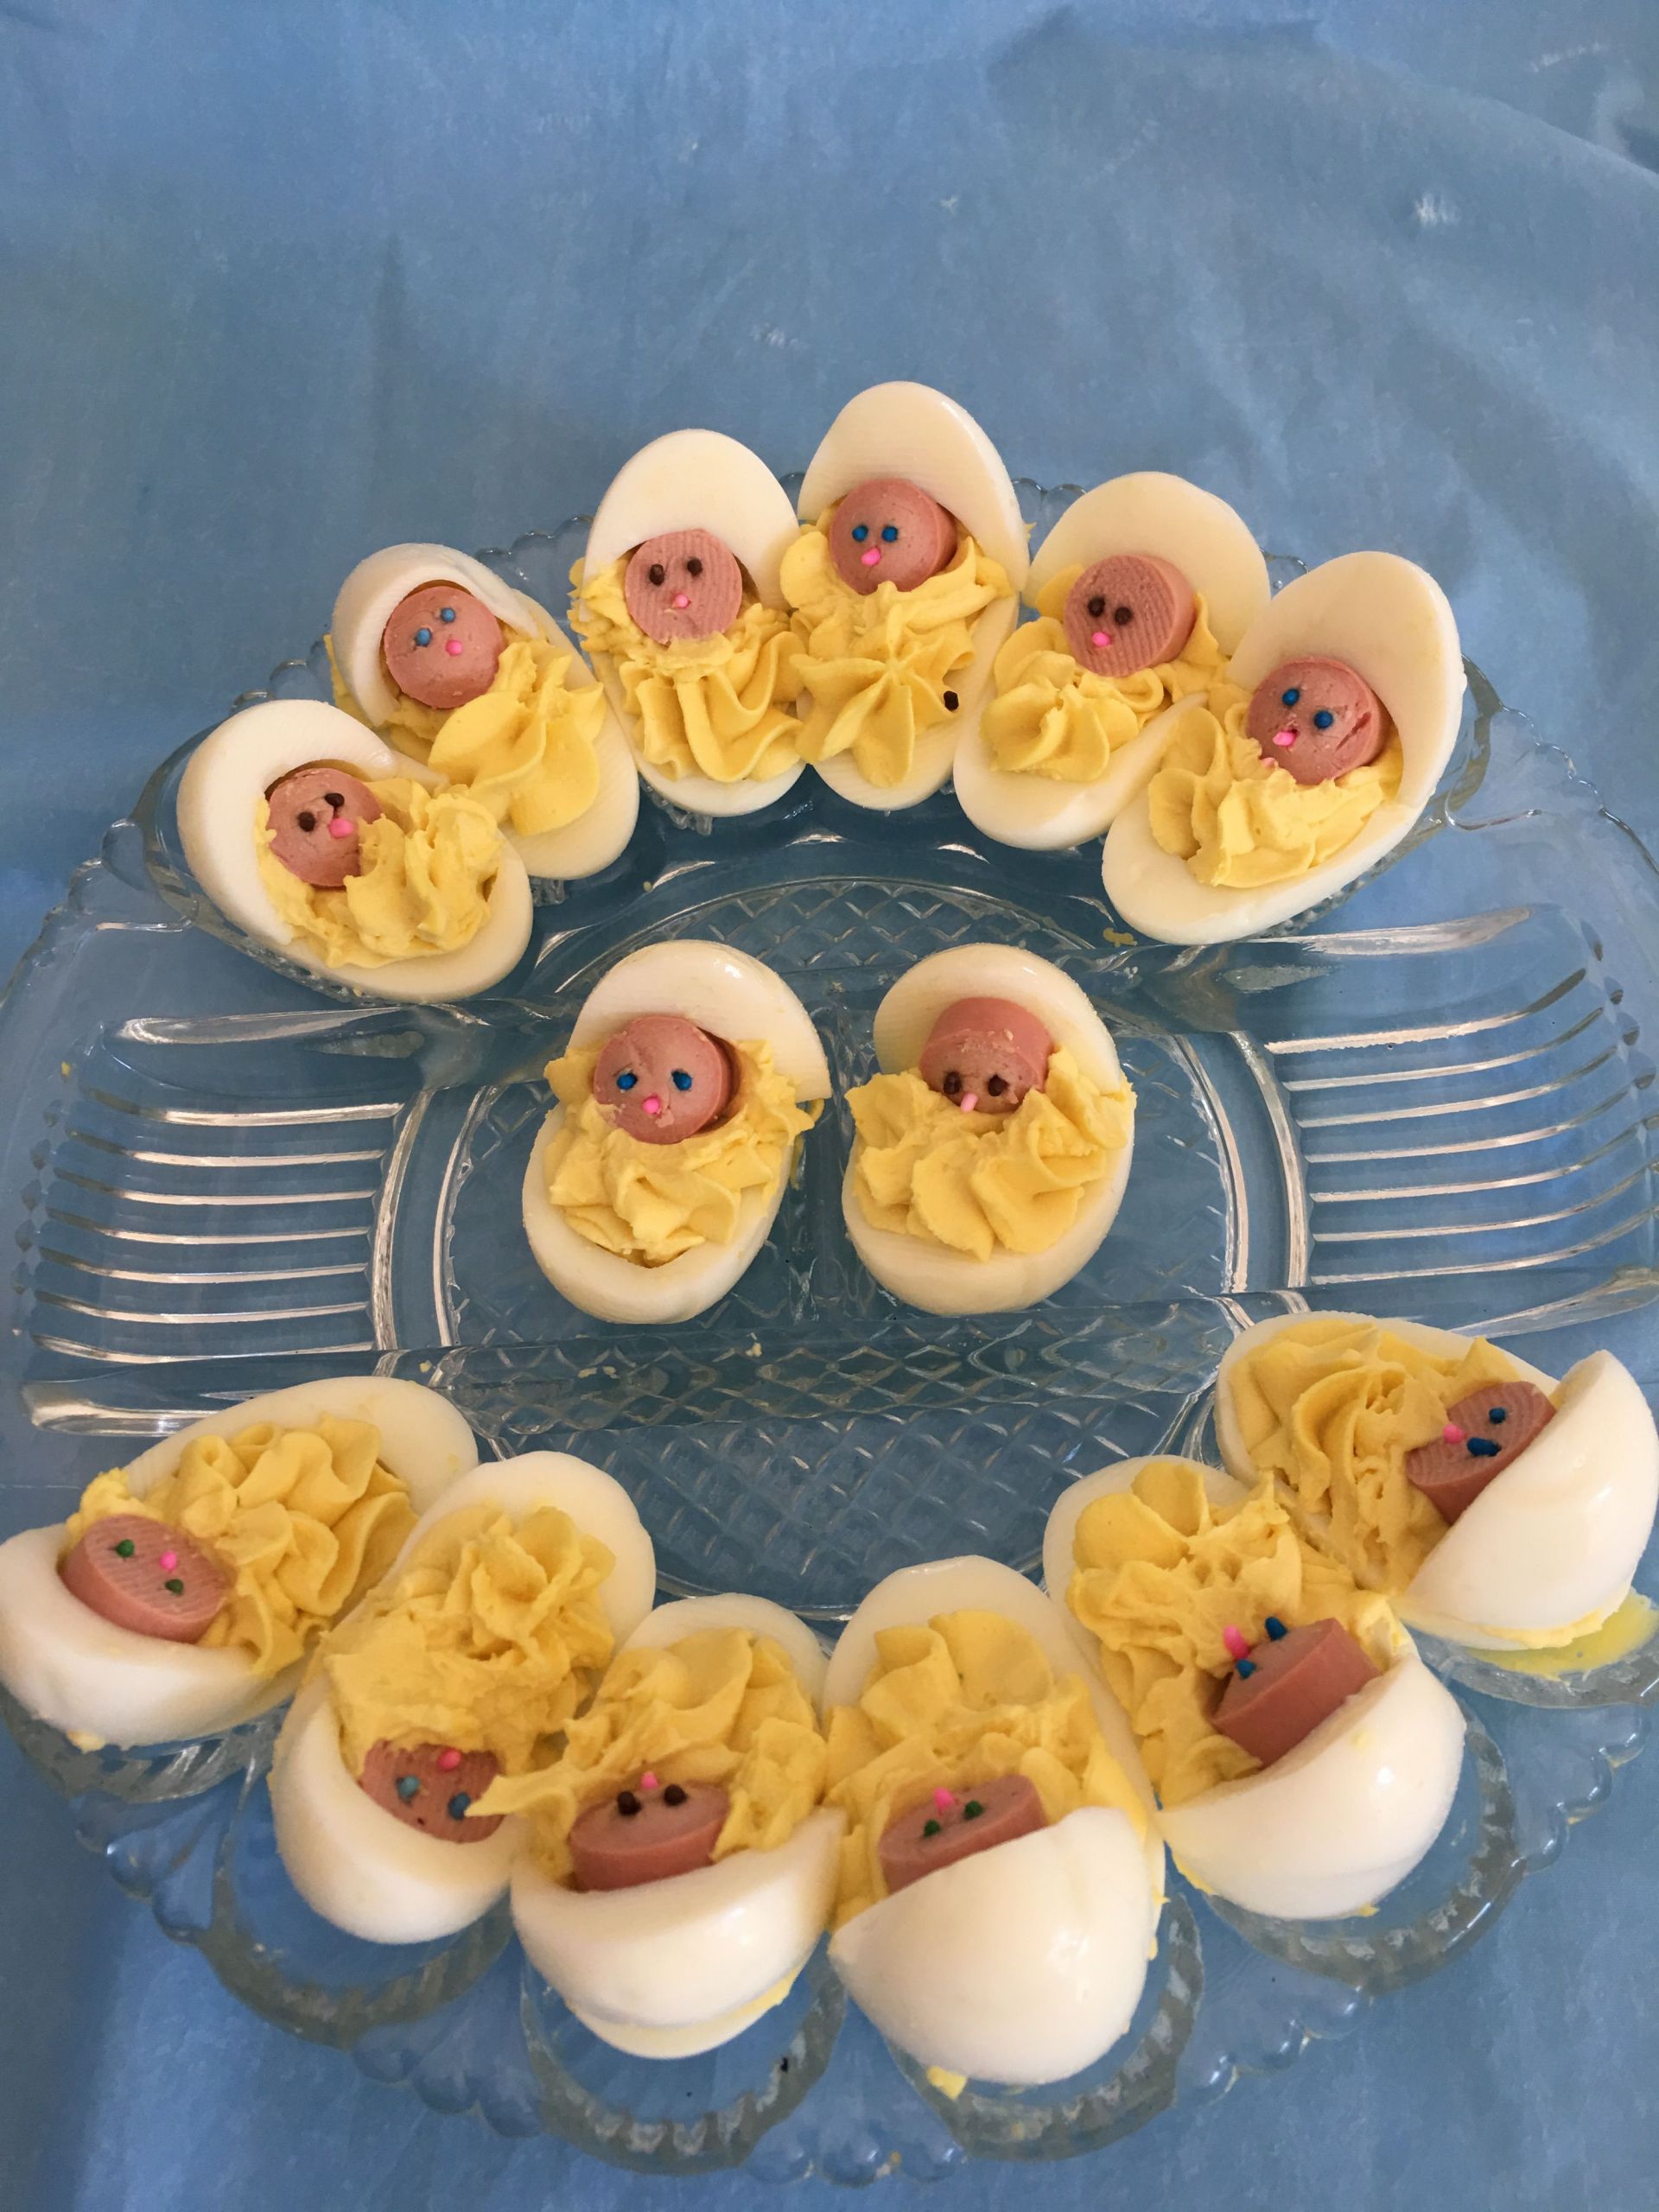 Deviled Eggs For Baby Shower
 Babies in a cradle deviled eggs for a baby shower or